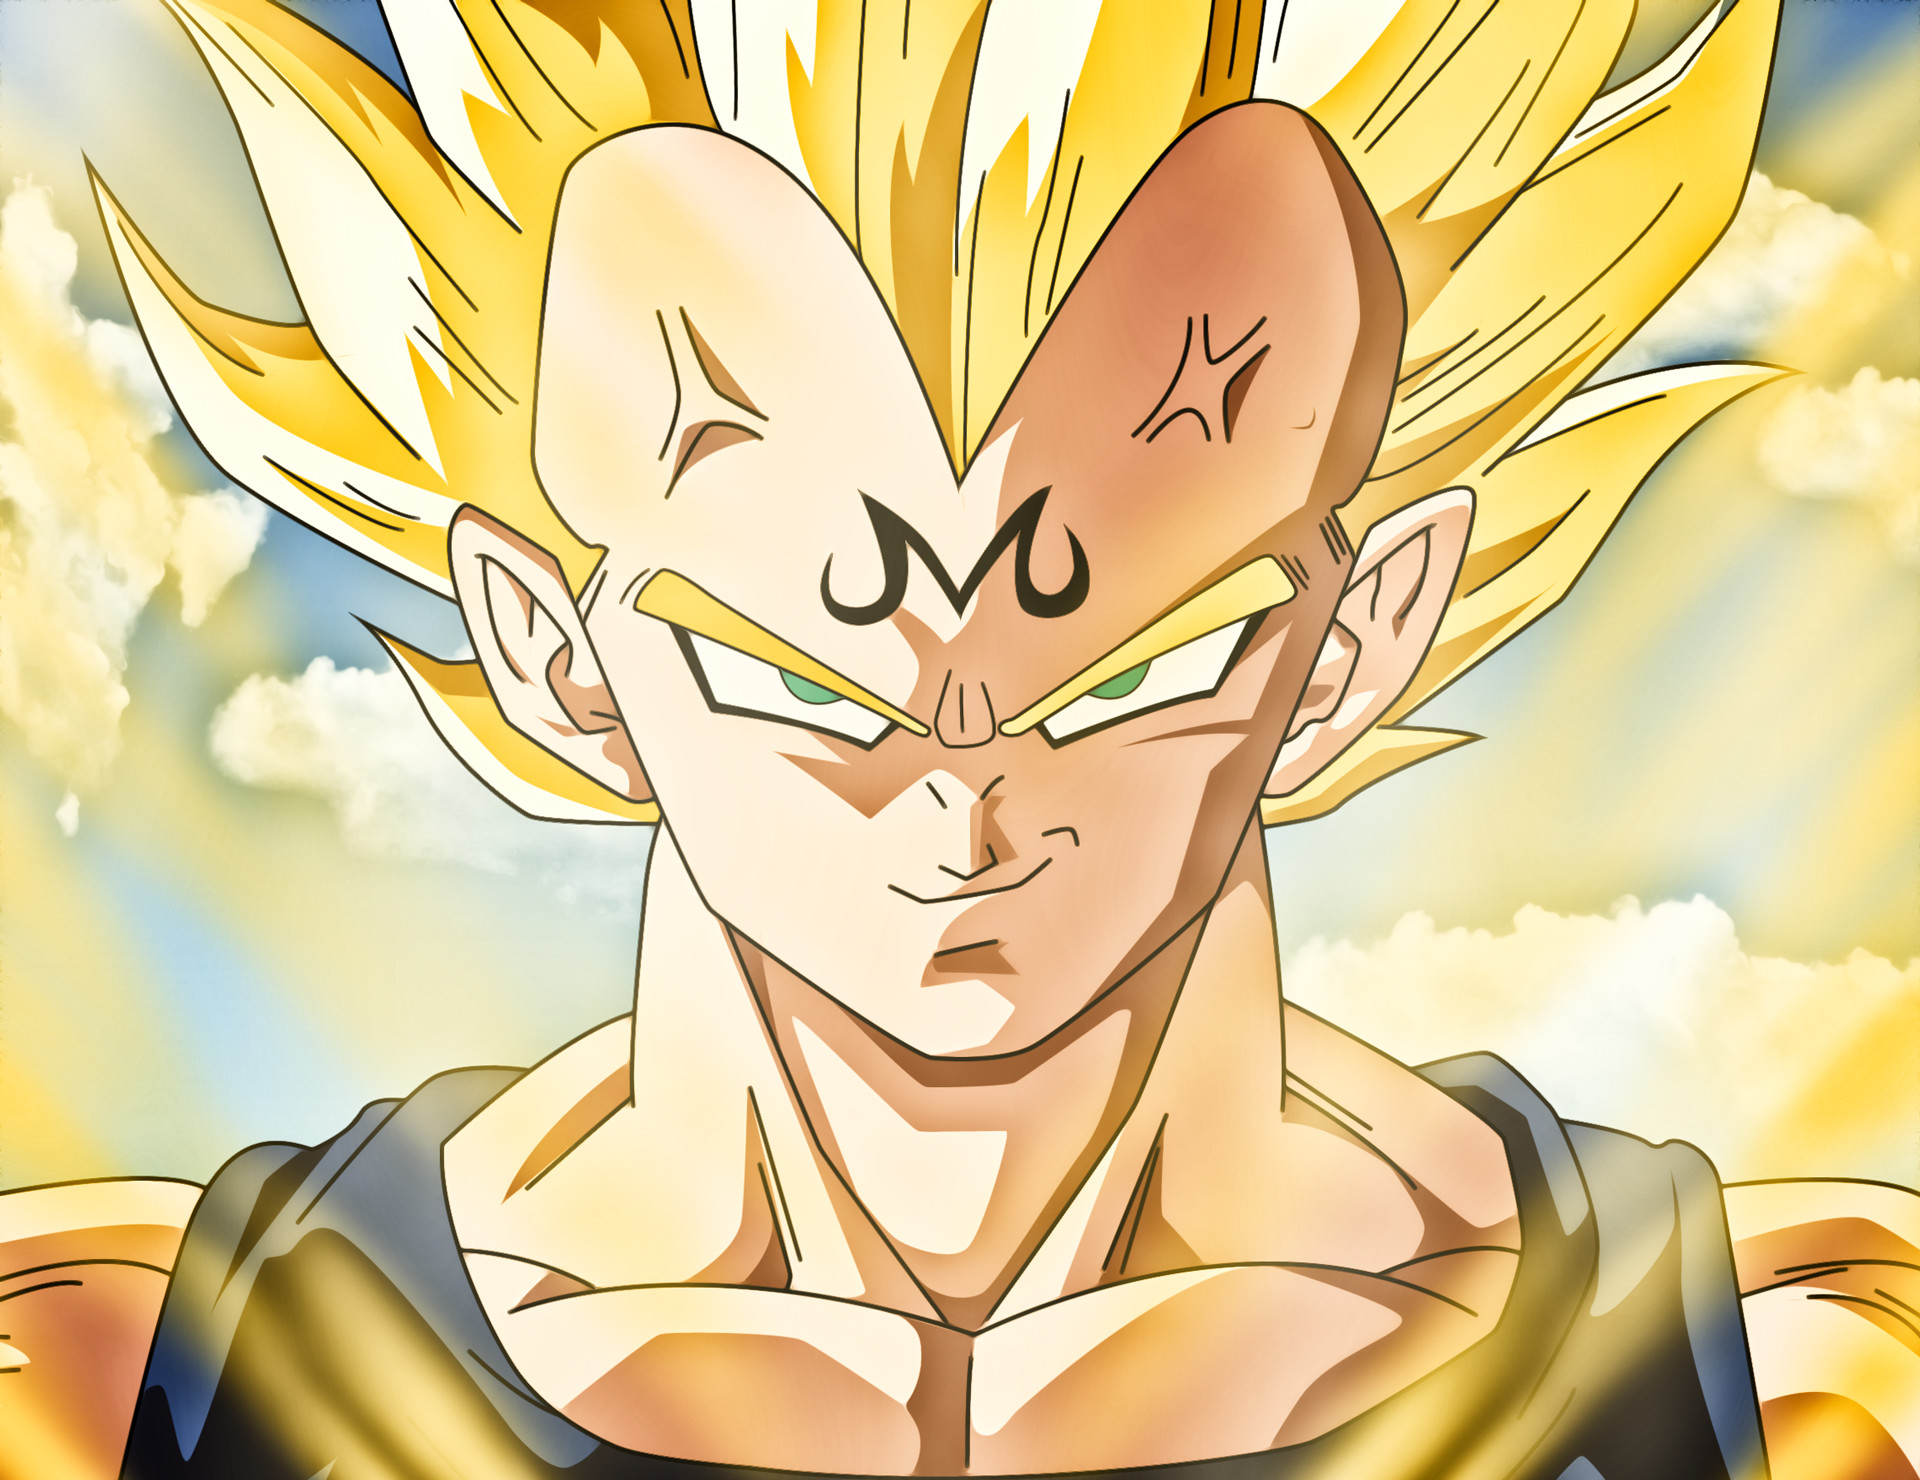 Free: Vegeta Wallpaper Fanart for Android - APK Download - nohat.cc